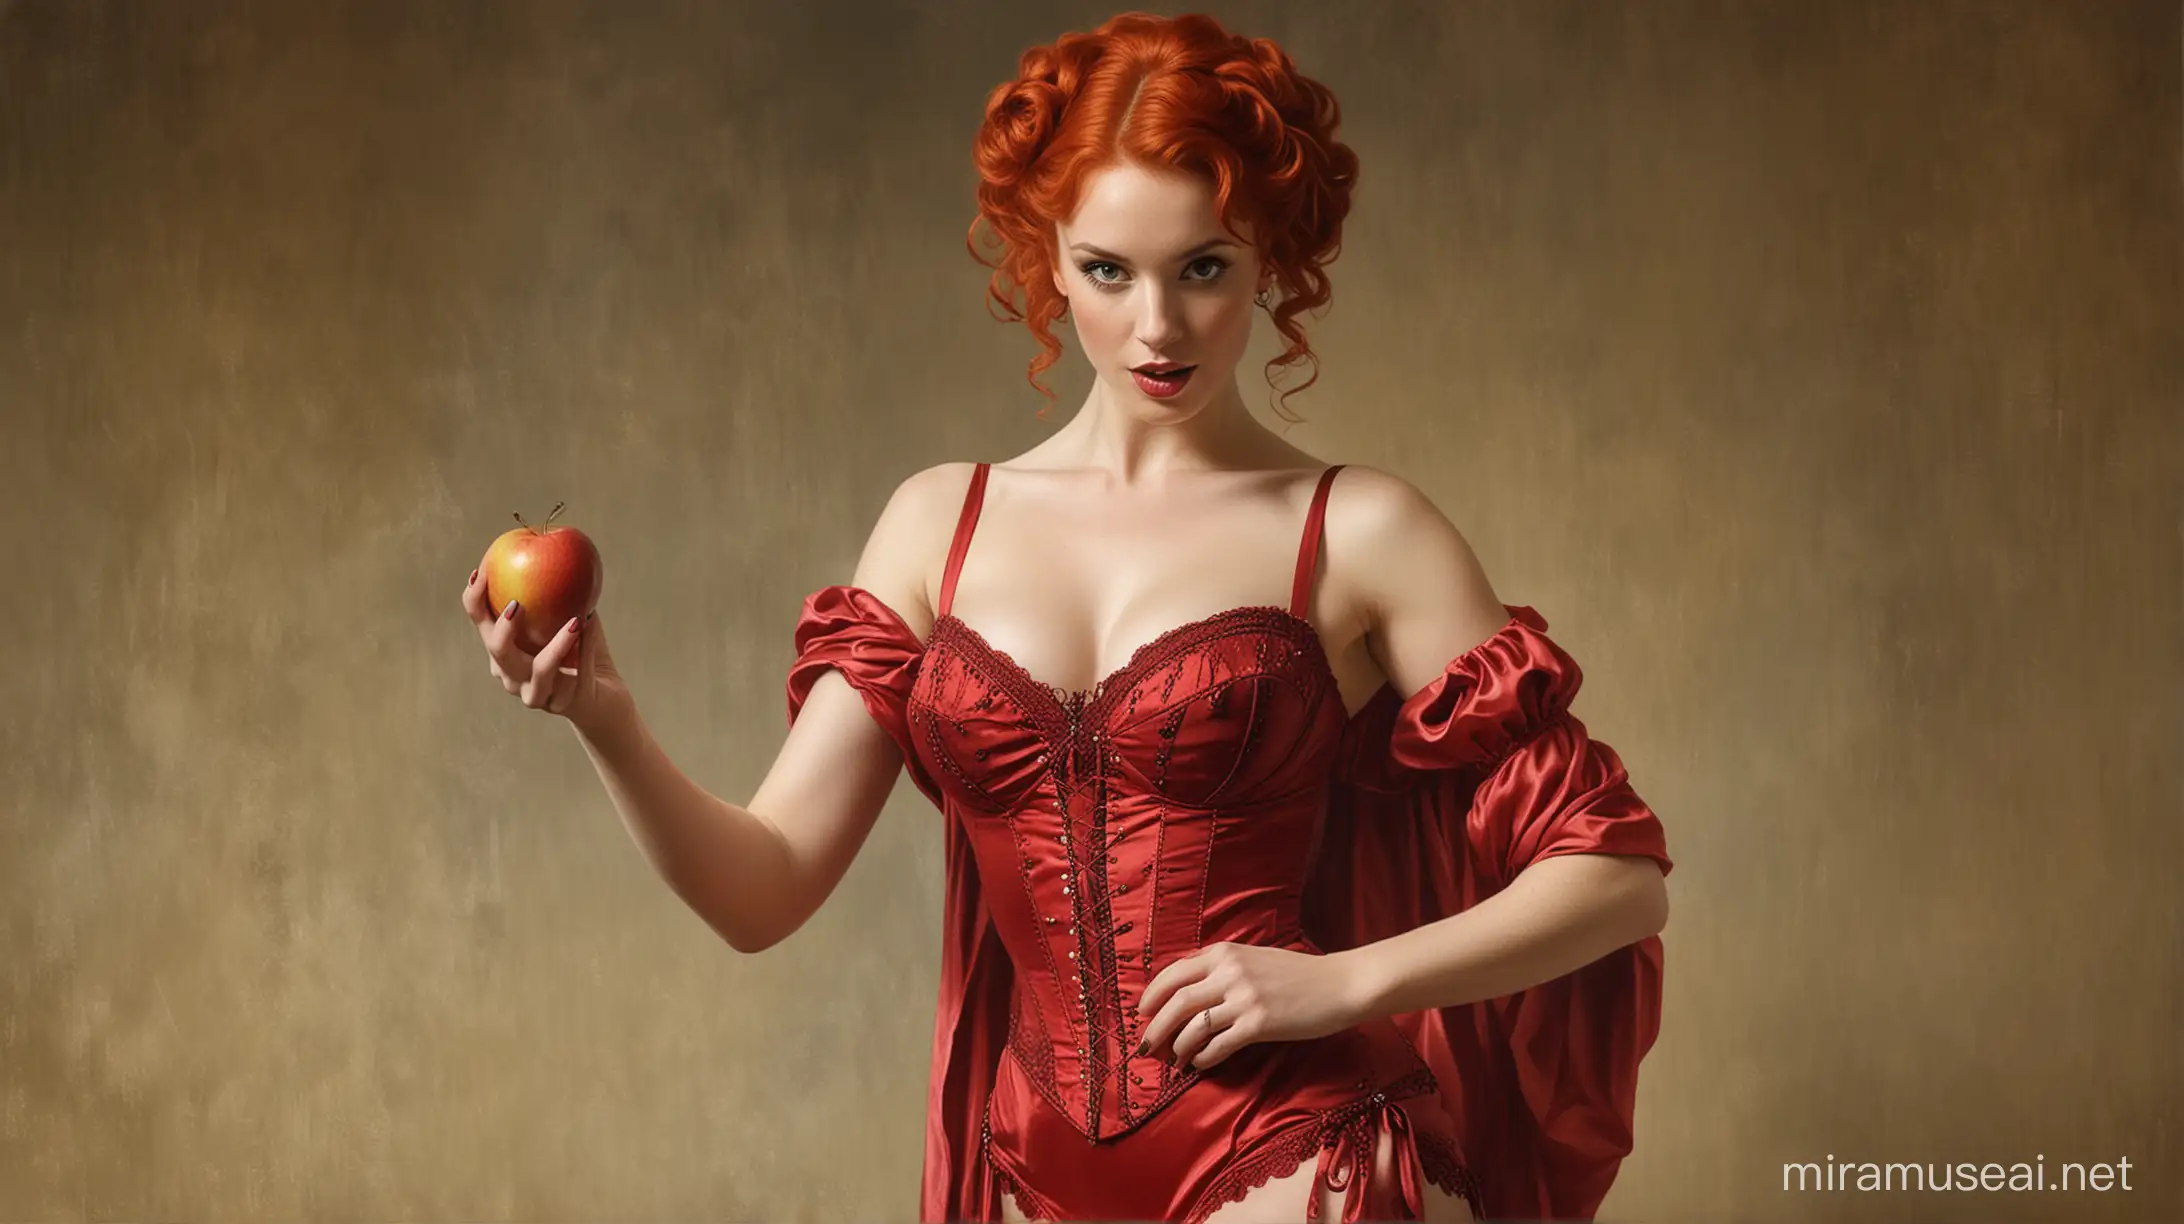 Seductive Burlesque Dancer in Crimson Garb Holding an Apple Inspired by John Colliers Lilith